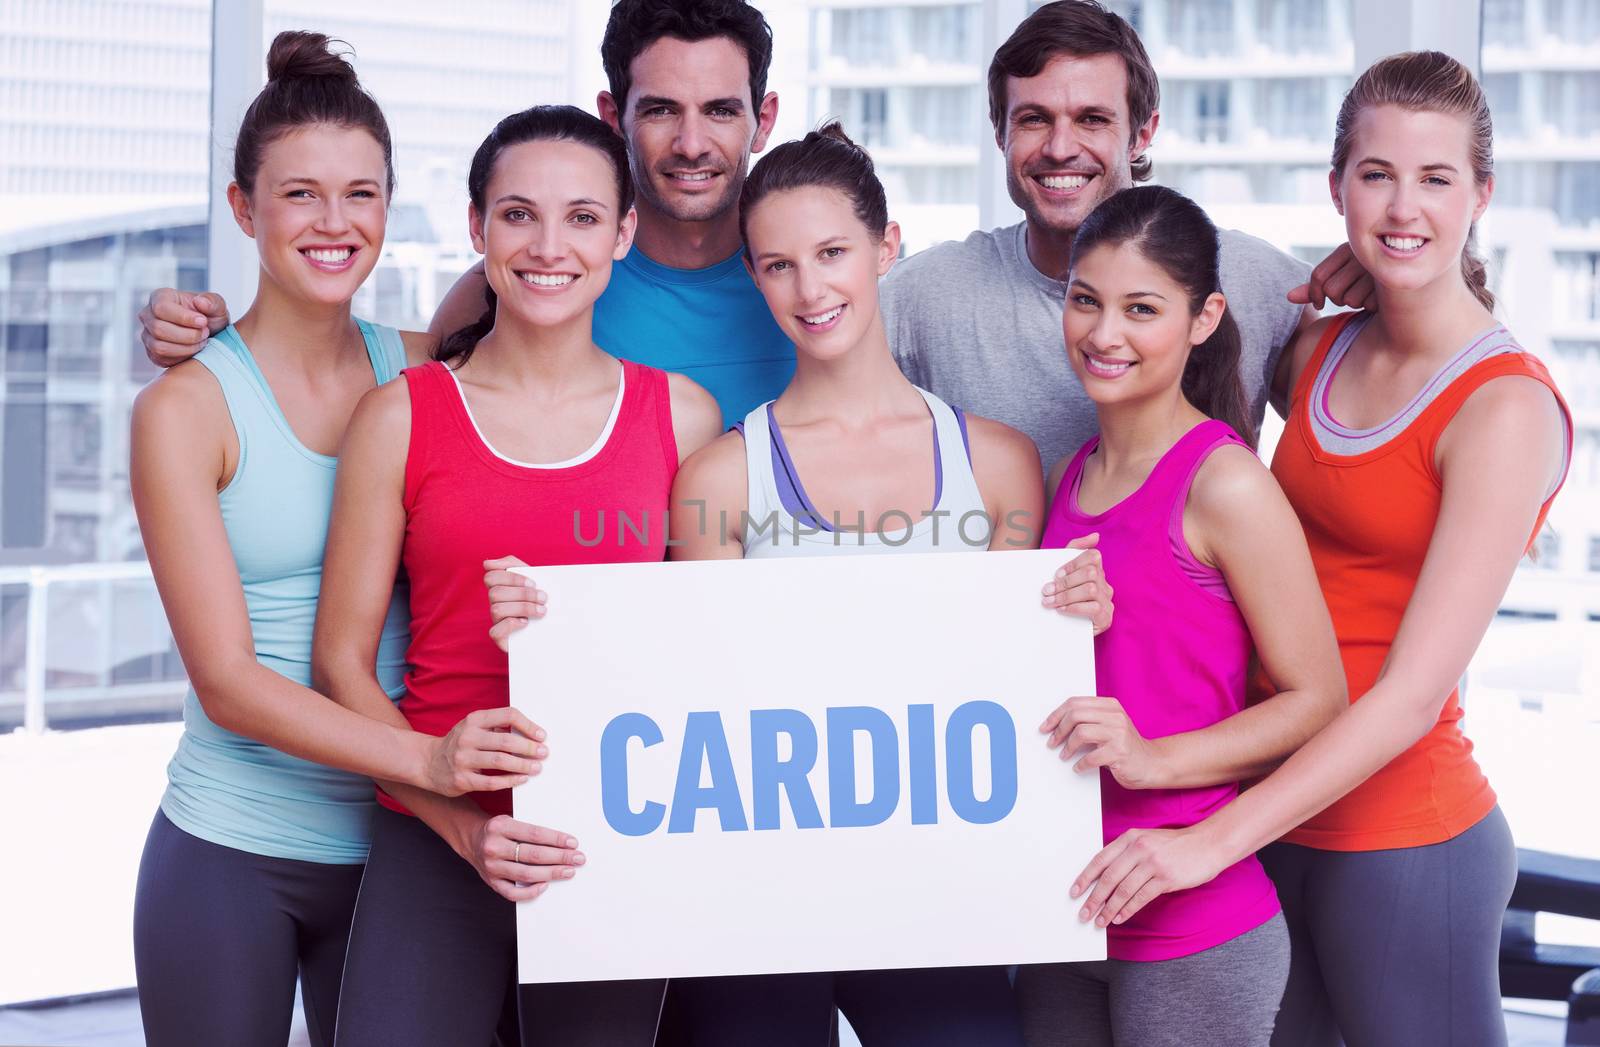 The word cardio against fit smiling people holding blank board